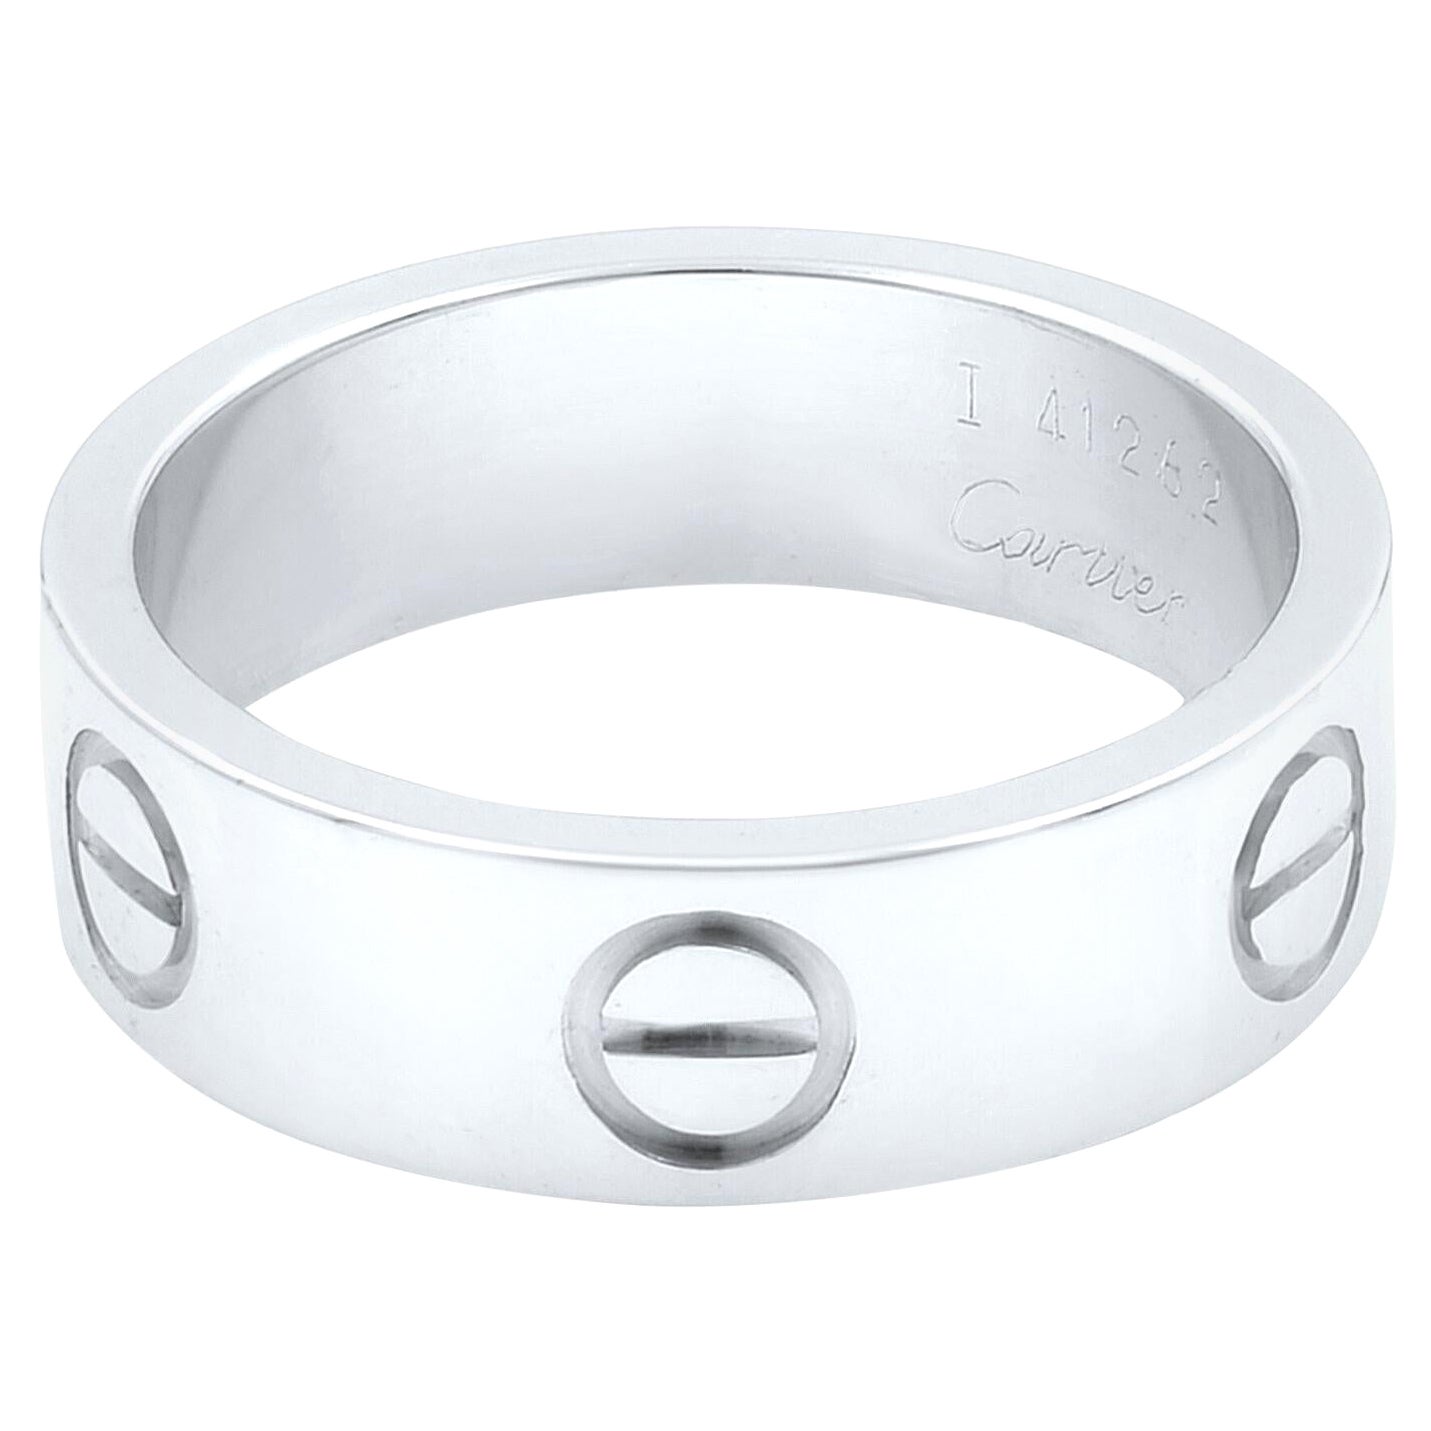 Cartier 18K White Gold Love Band Ring